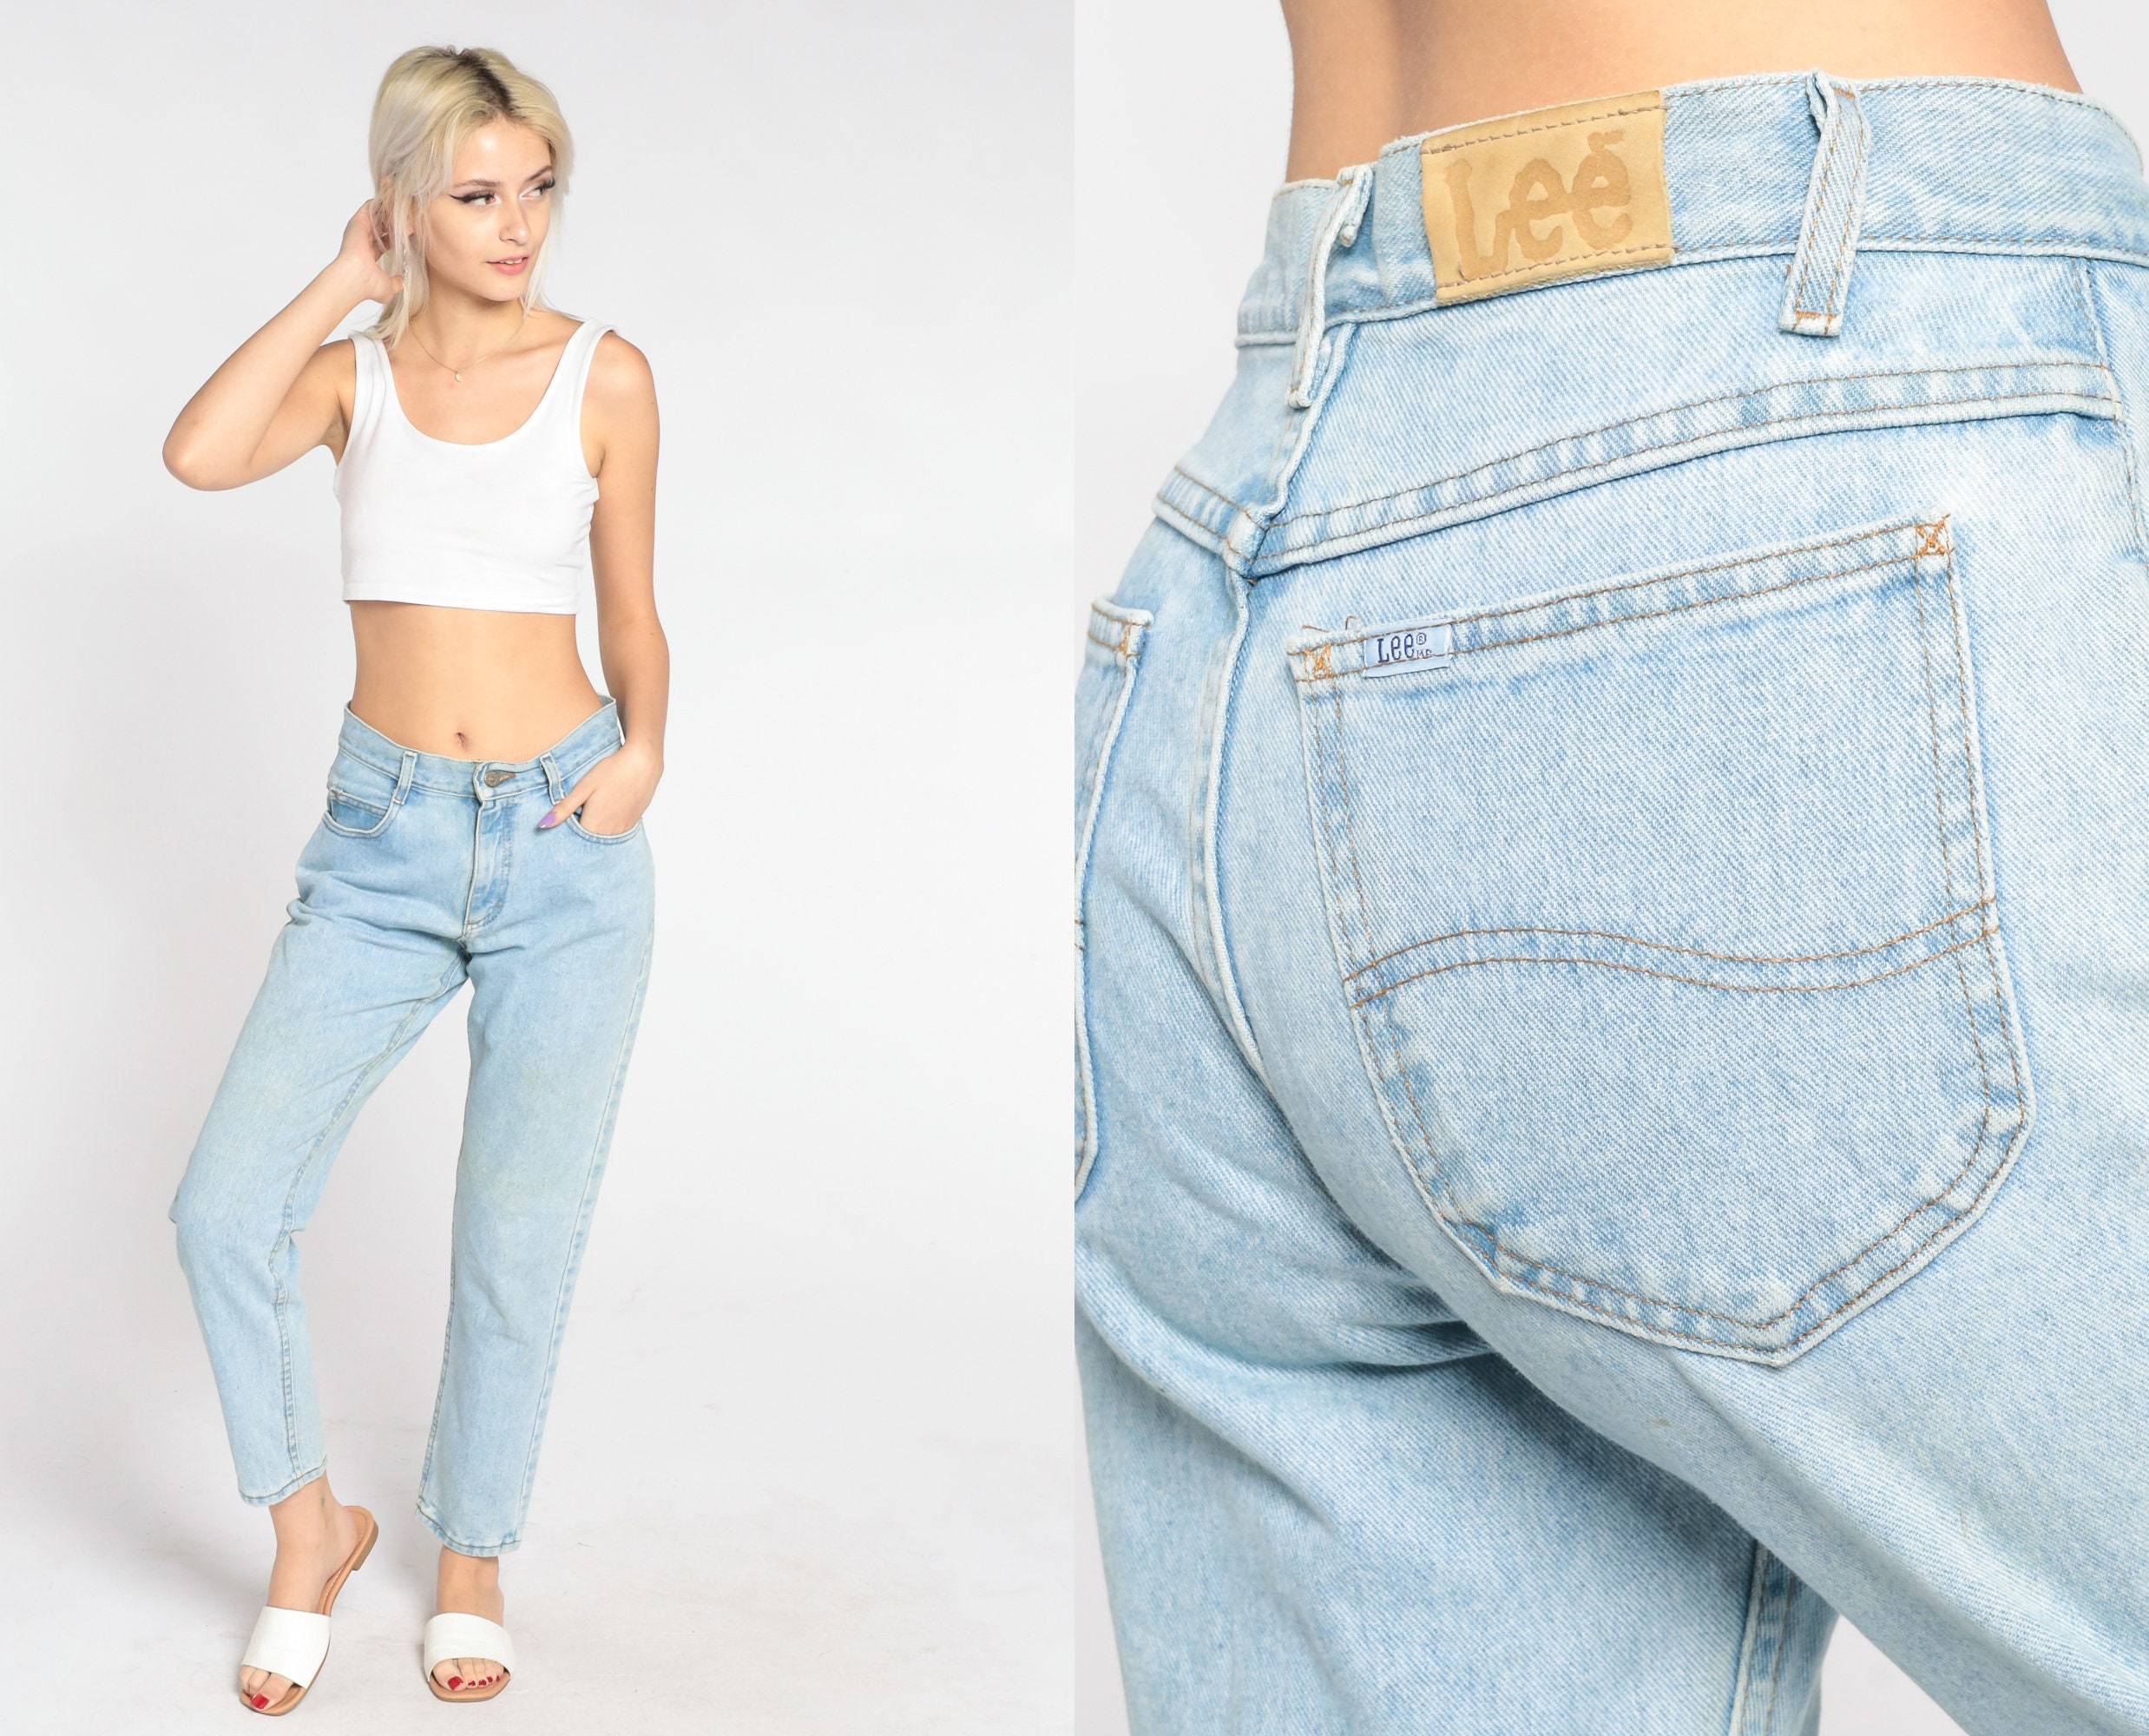 Lee Tapered Jeans 90s Mom Jeans Mid Rise Light Wash Denim Pants Retro ...